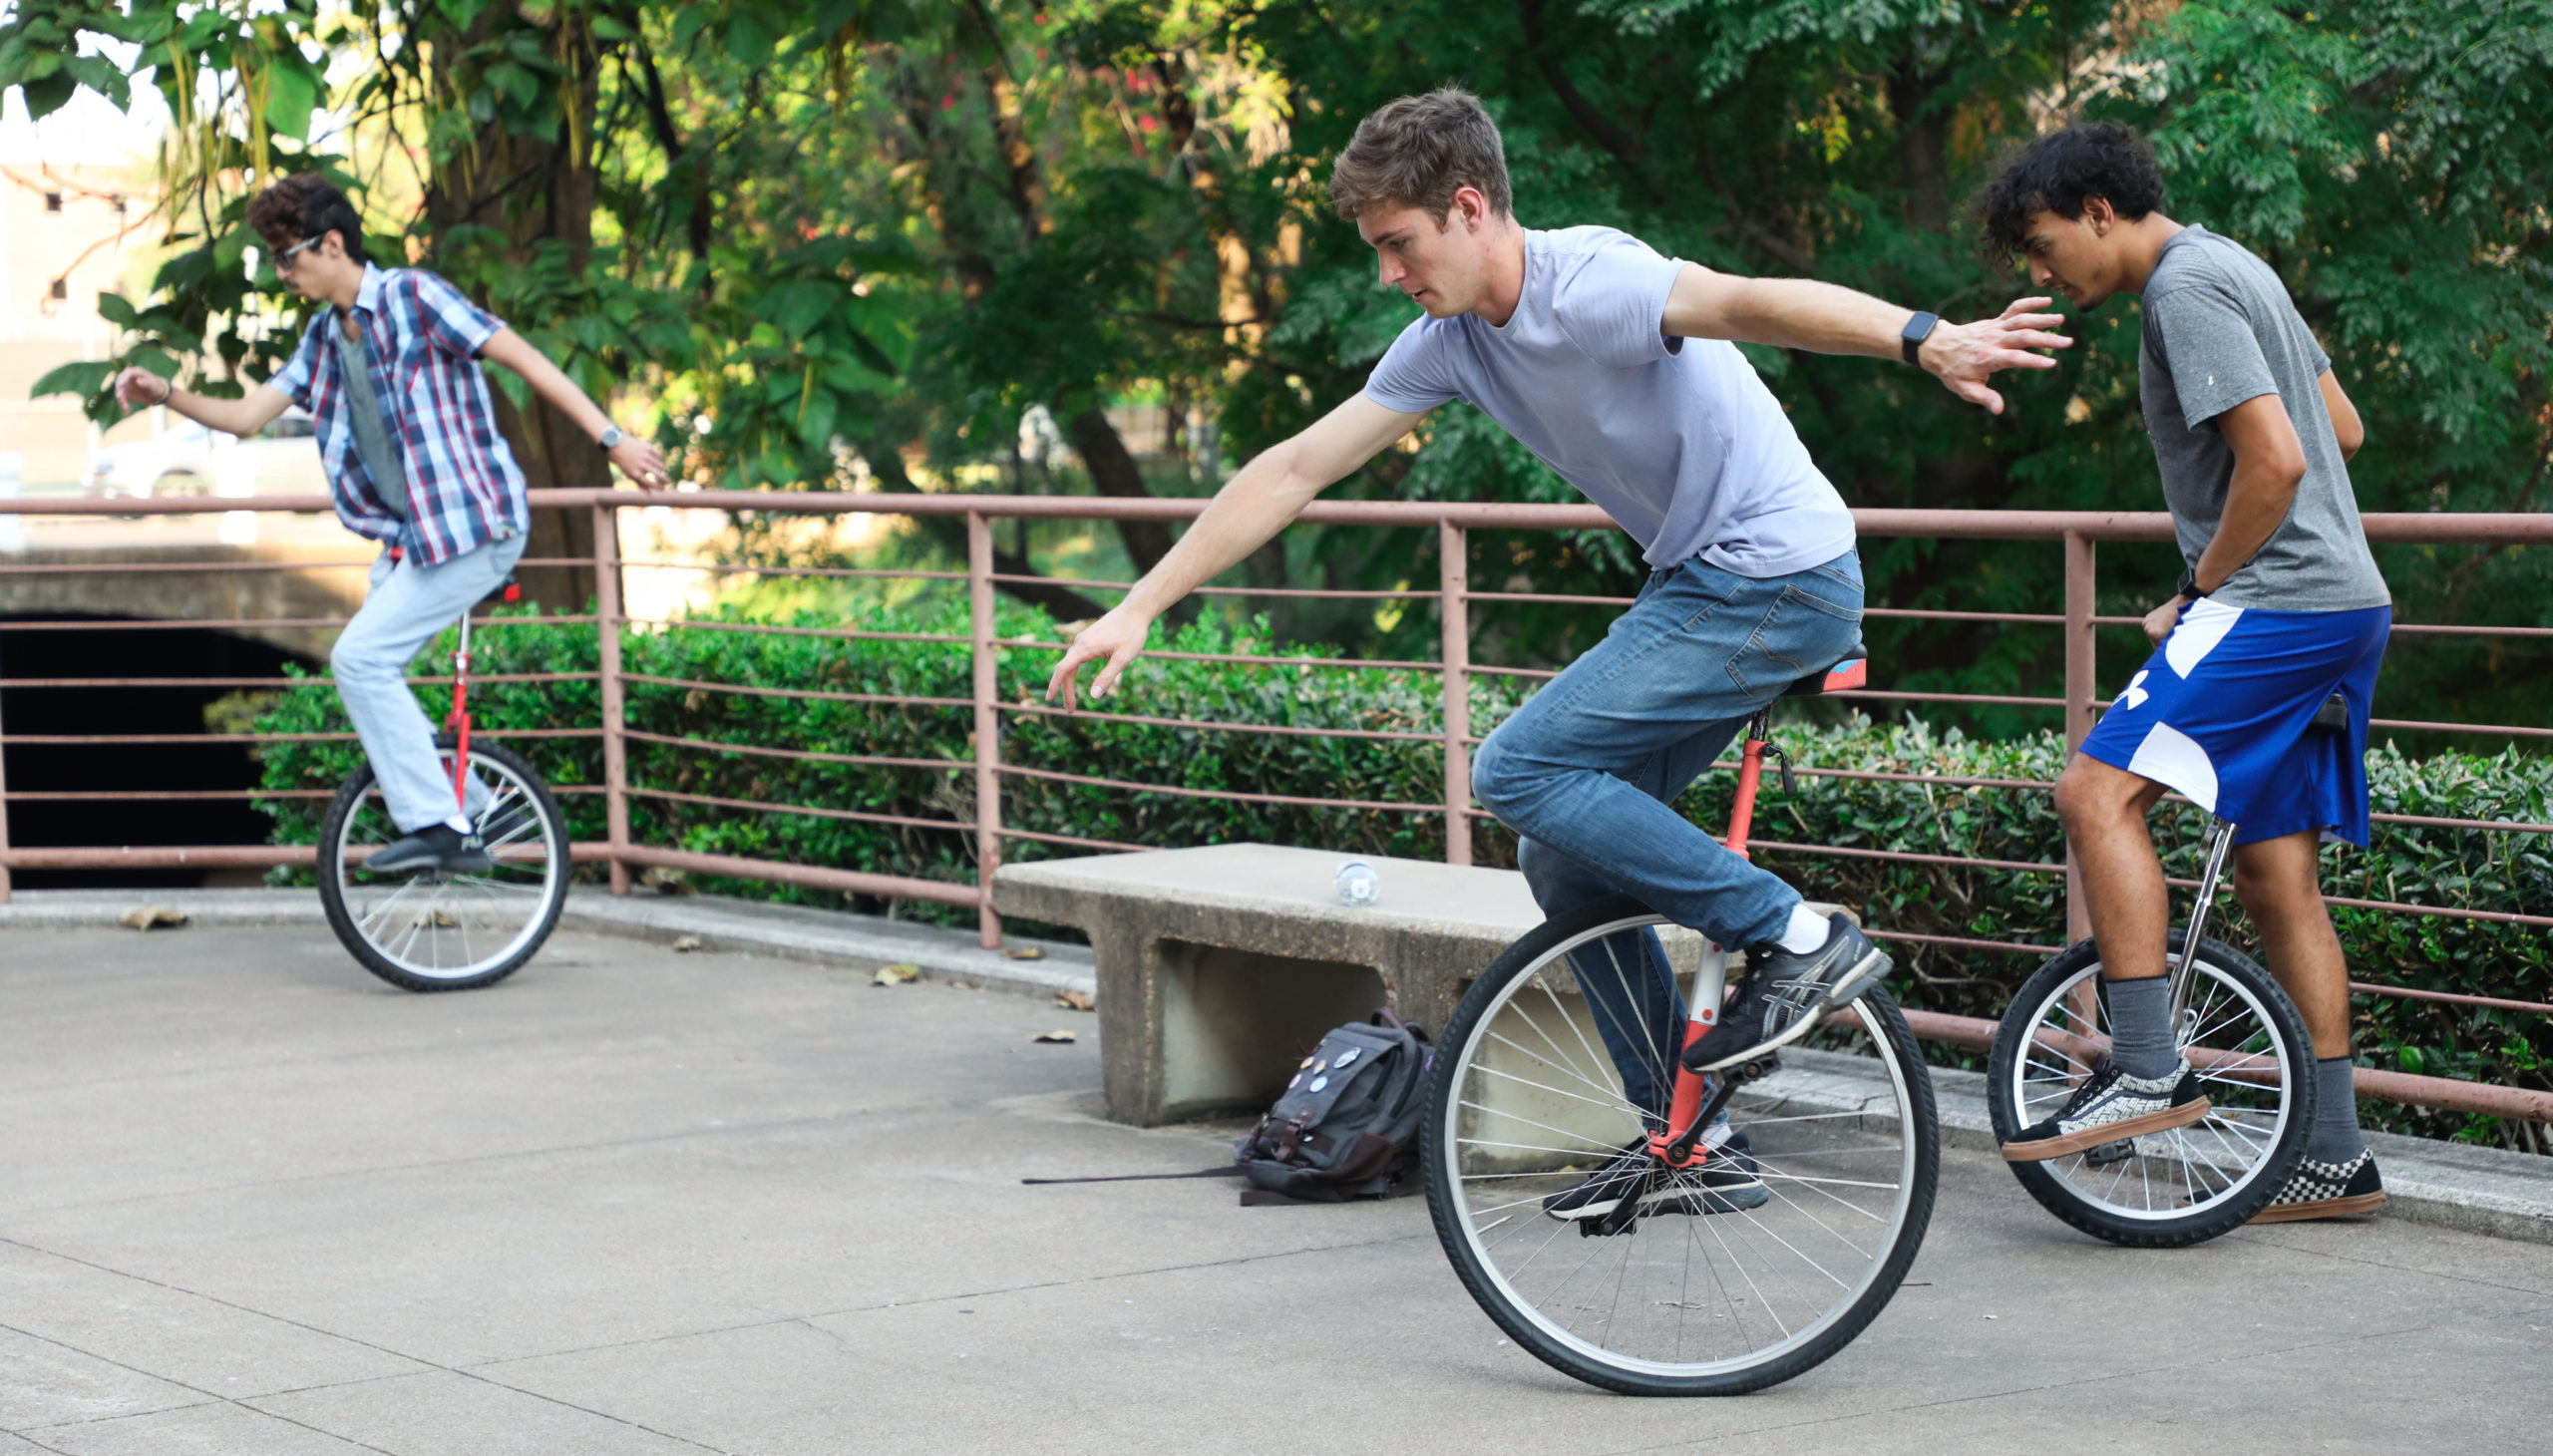 Unicycle: The Cycle Continues: Unicycle Academy At Baylor, Unicycle And Helmets Provider, 2022. 2560x1460 HD Wallpaper.